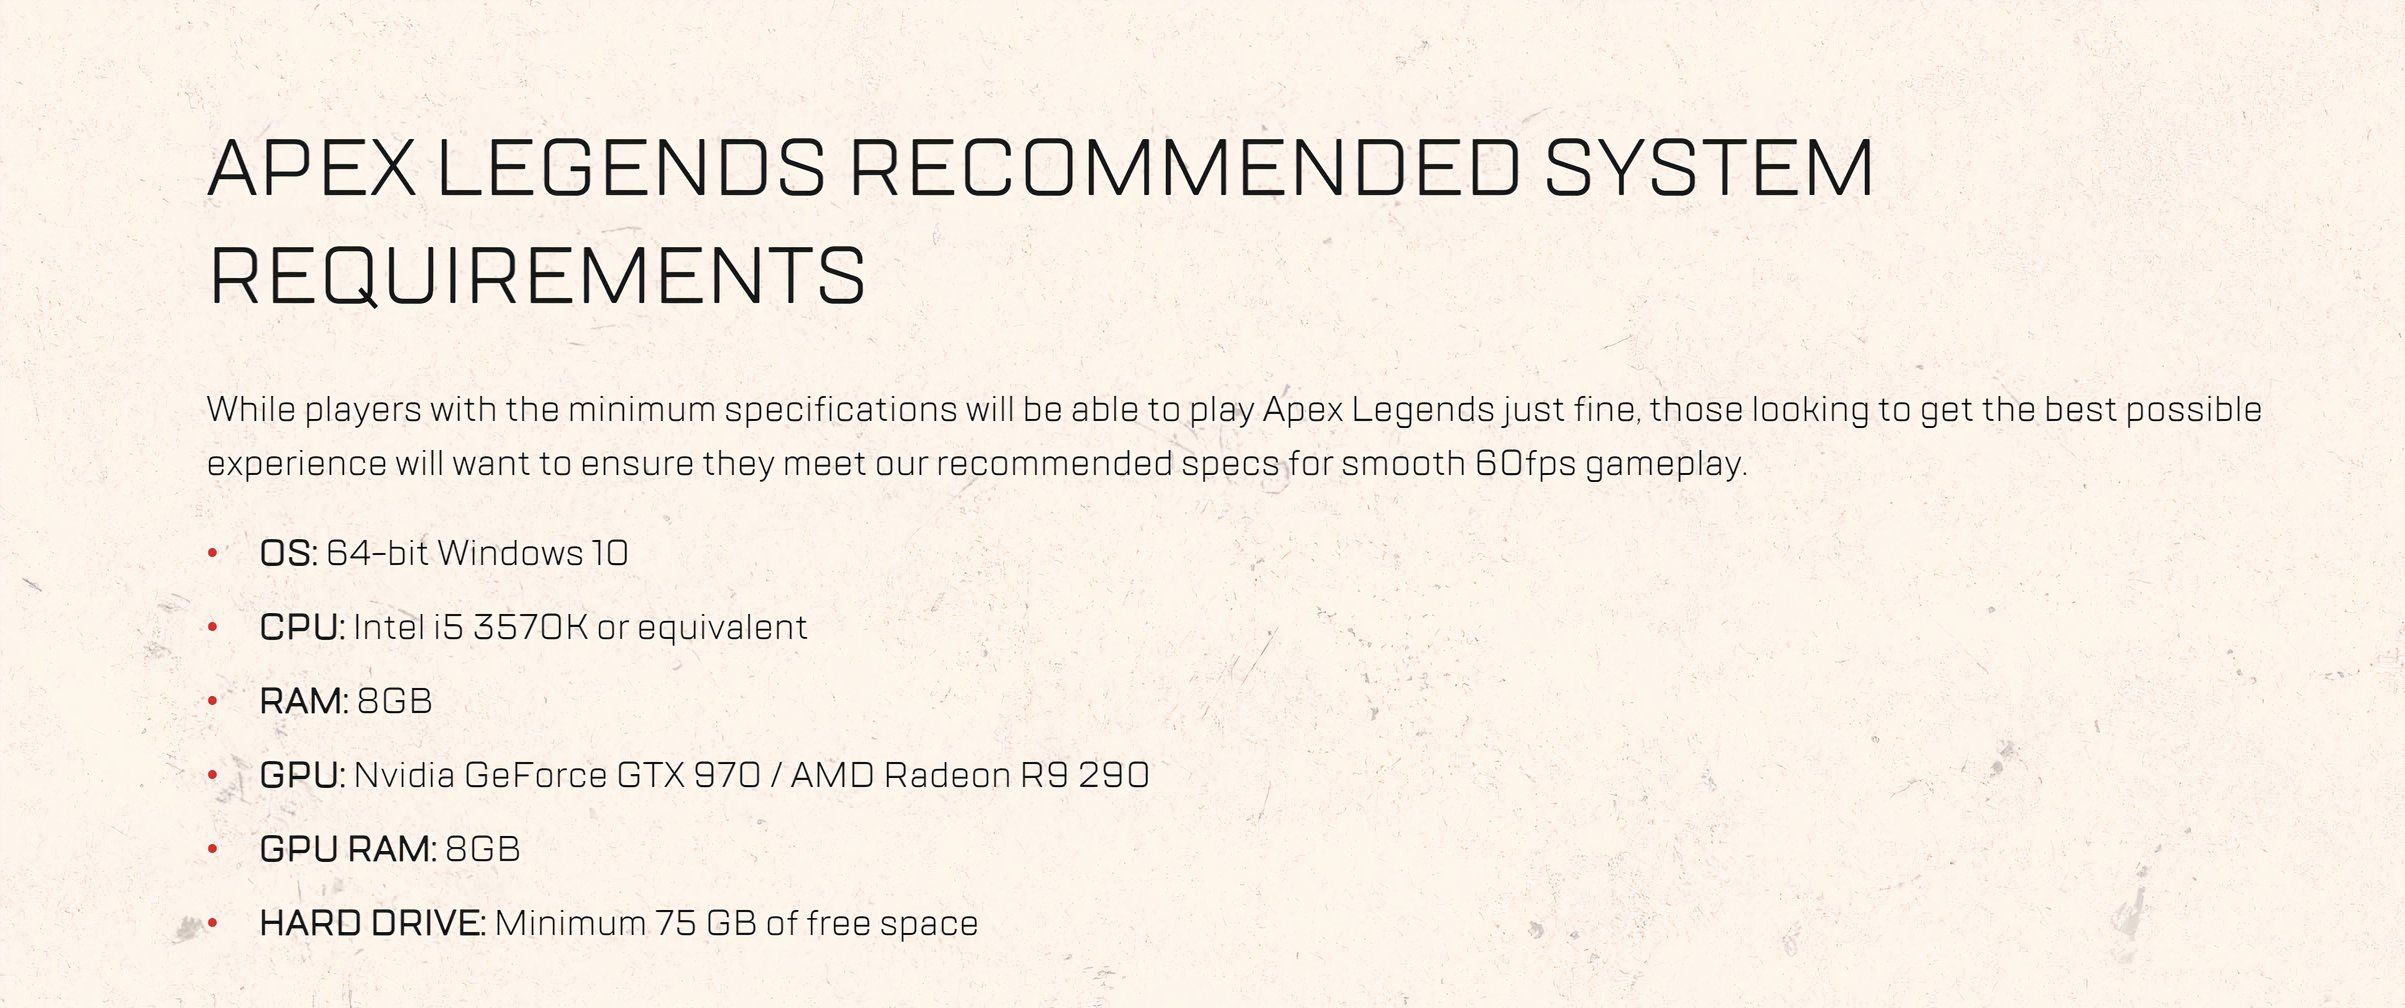 Apex Legends Recommended Requirements